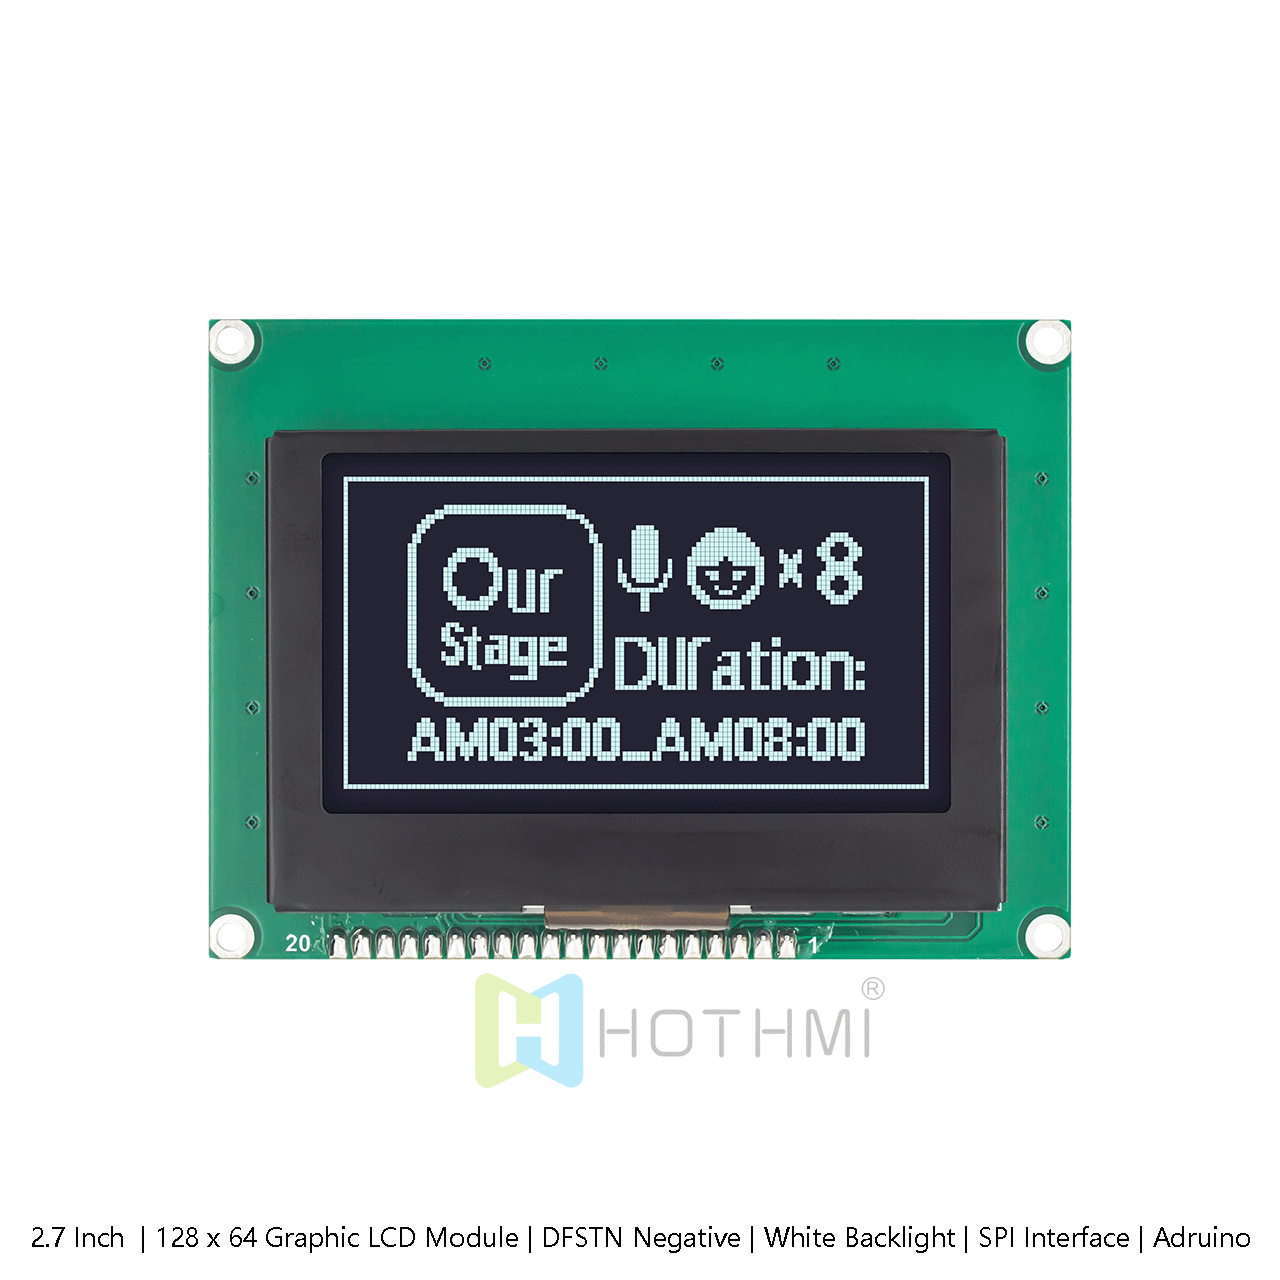 2.7 Inch Graphic 128x64 Graphic LCD Display | 128 x 64 Graphic LCD Module | DFSTN Negative | White Backlight | SPI Interface | Adruino | White on Black